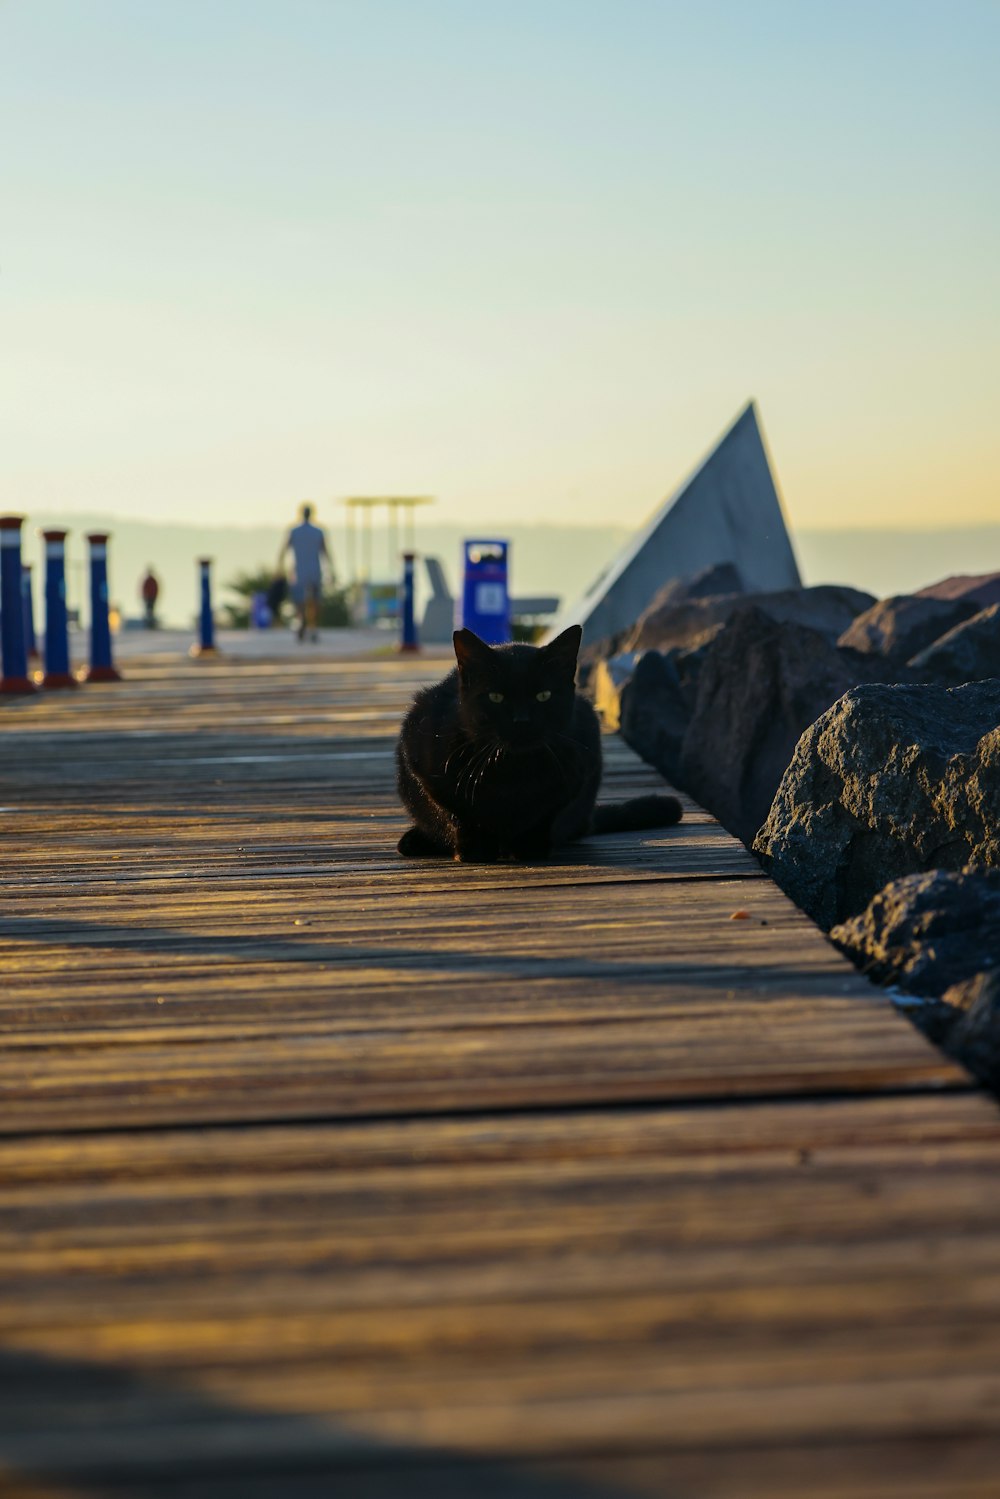 a black cat sitting on a wooden dock